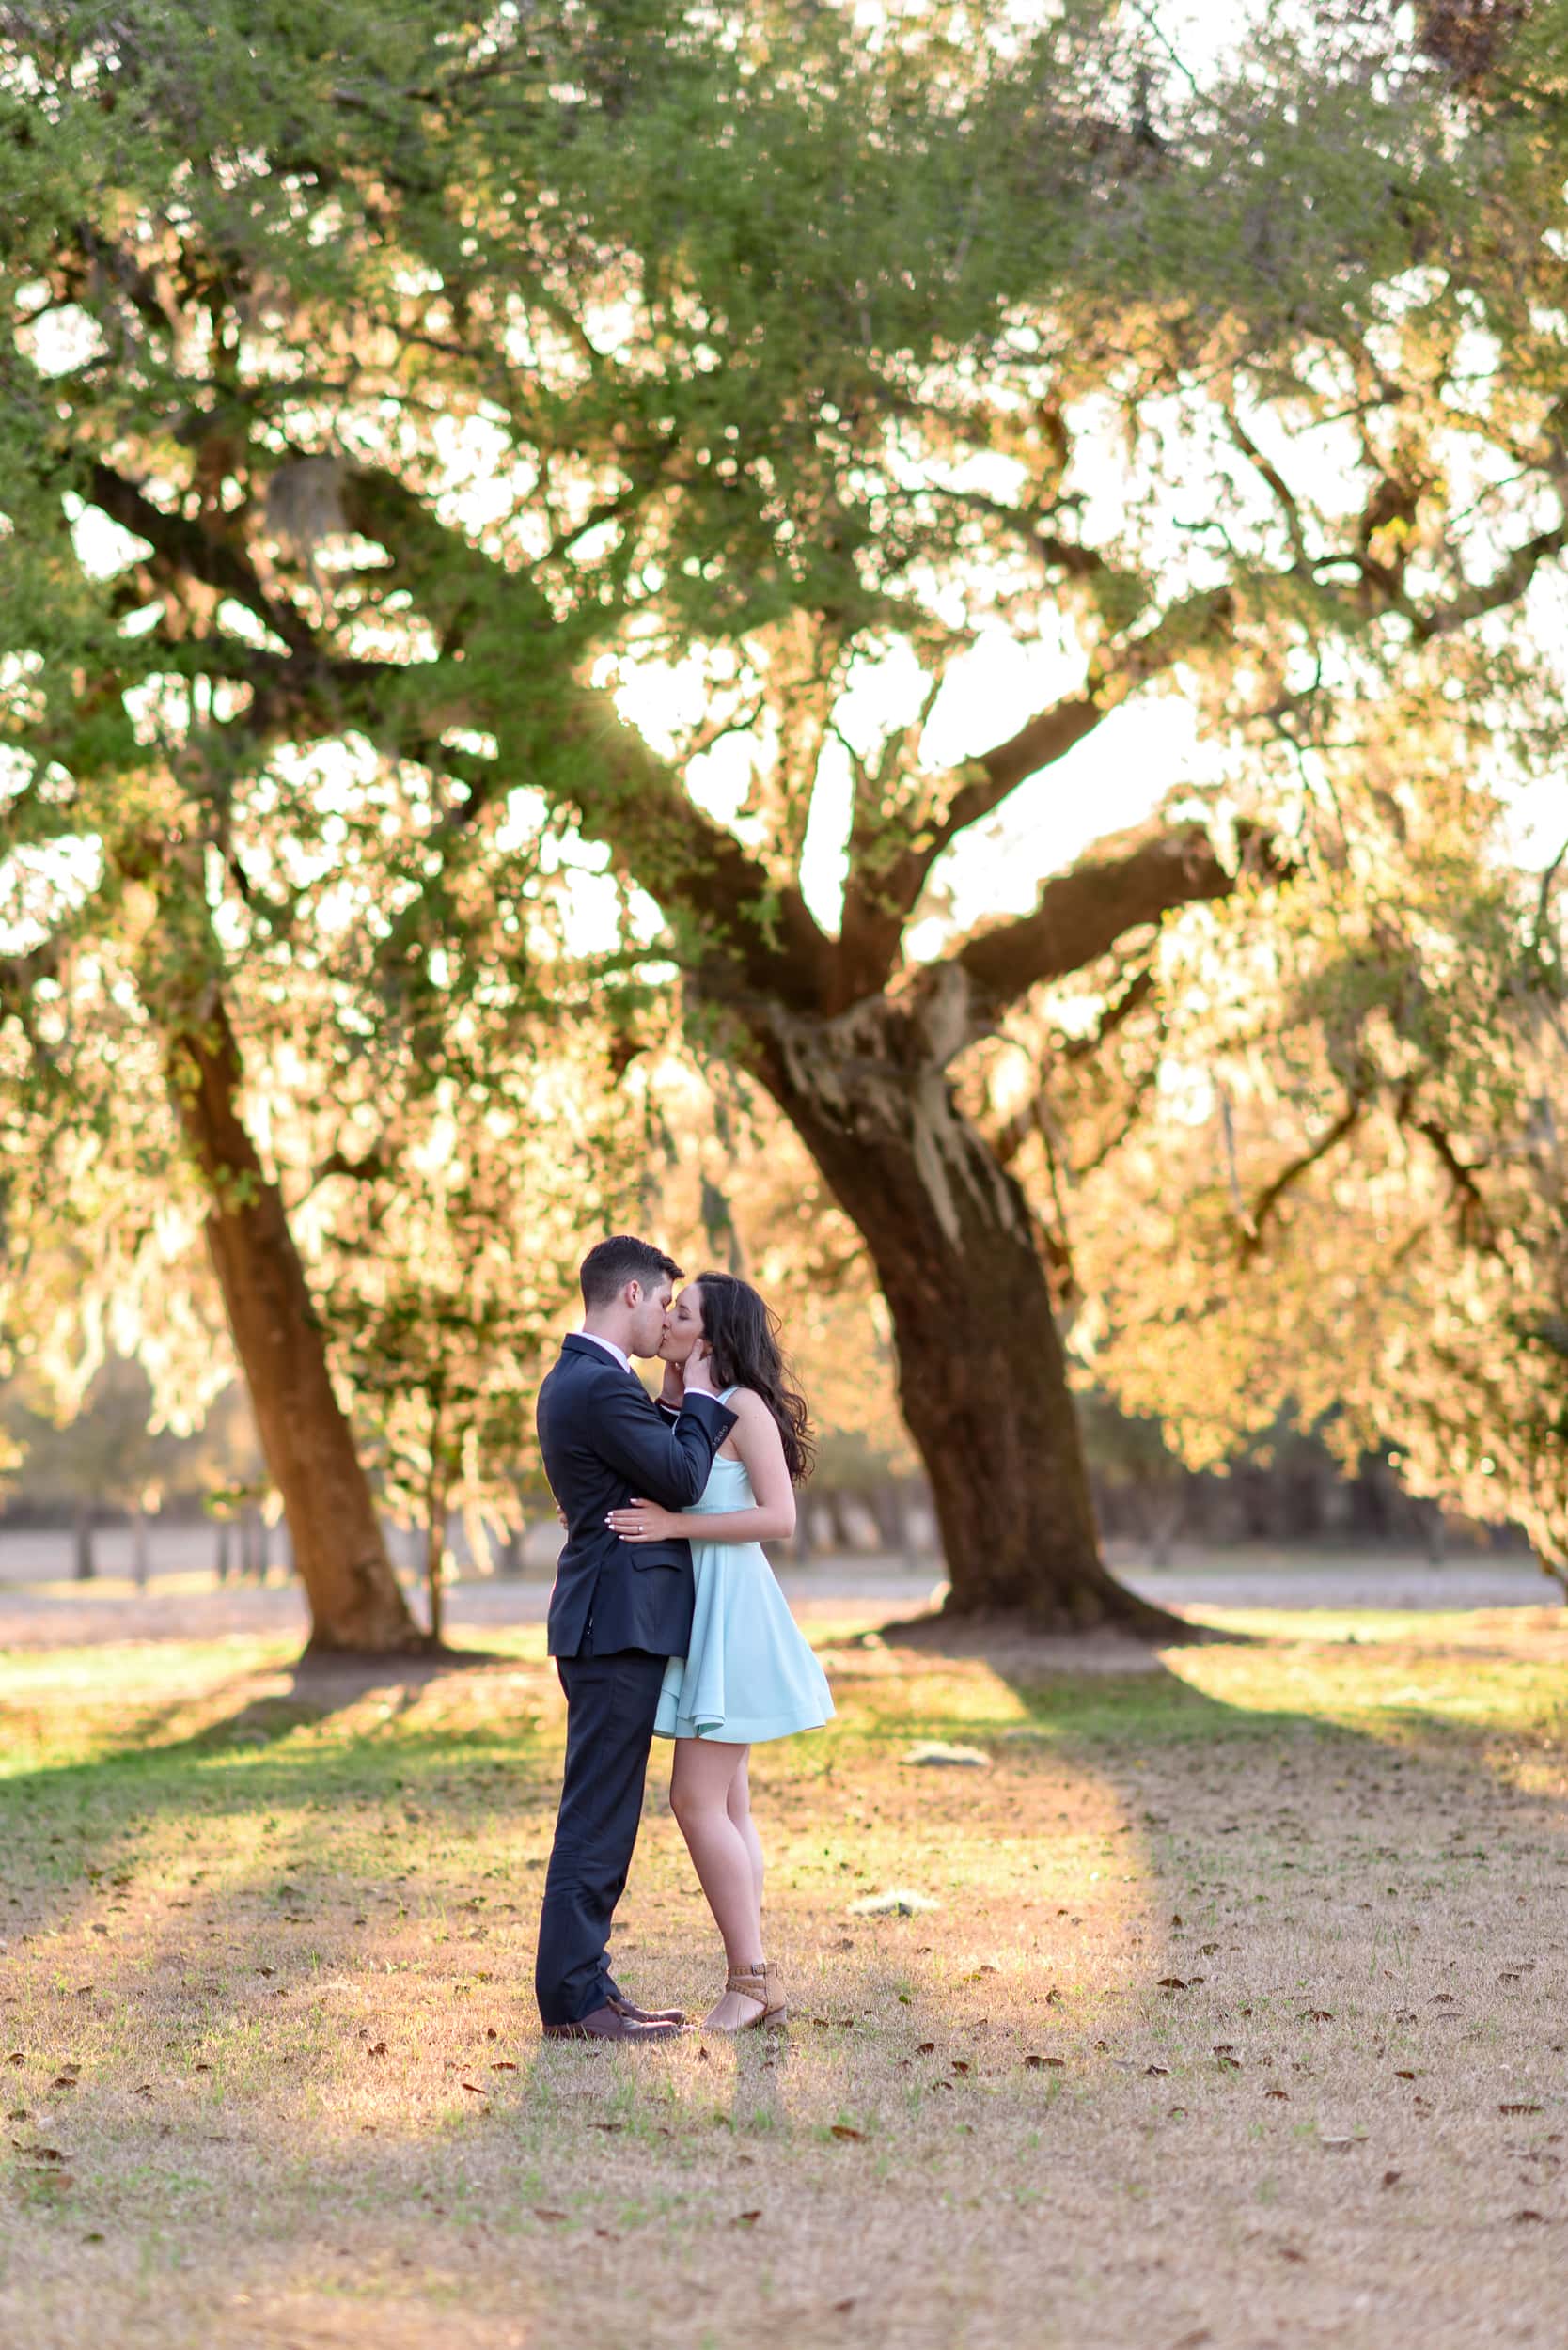 Kiss under the oak tree in the sunset - Mansfield Plantation, Georgetown